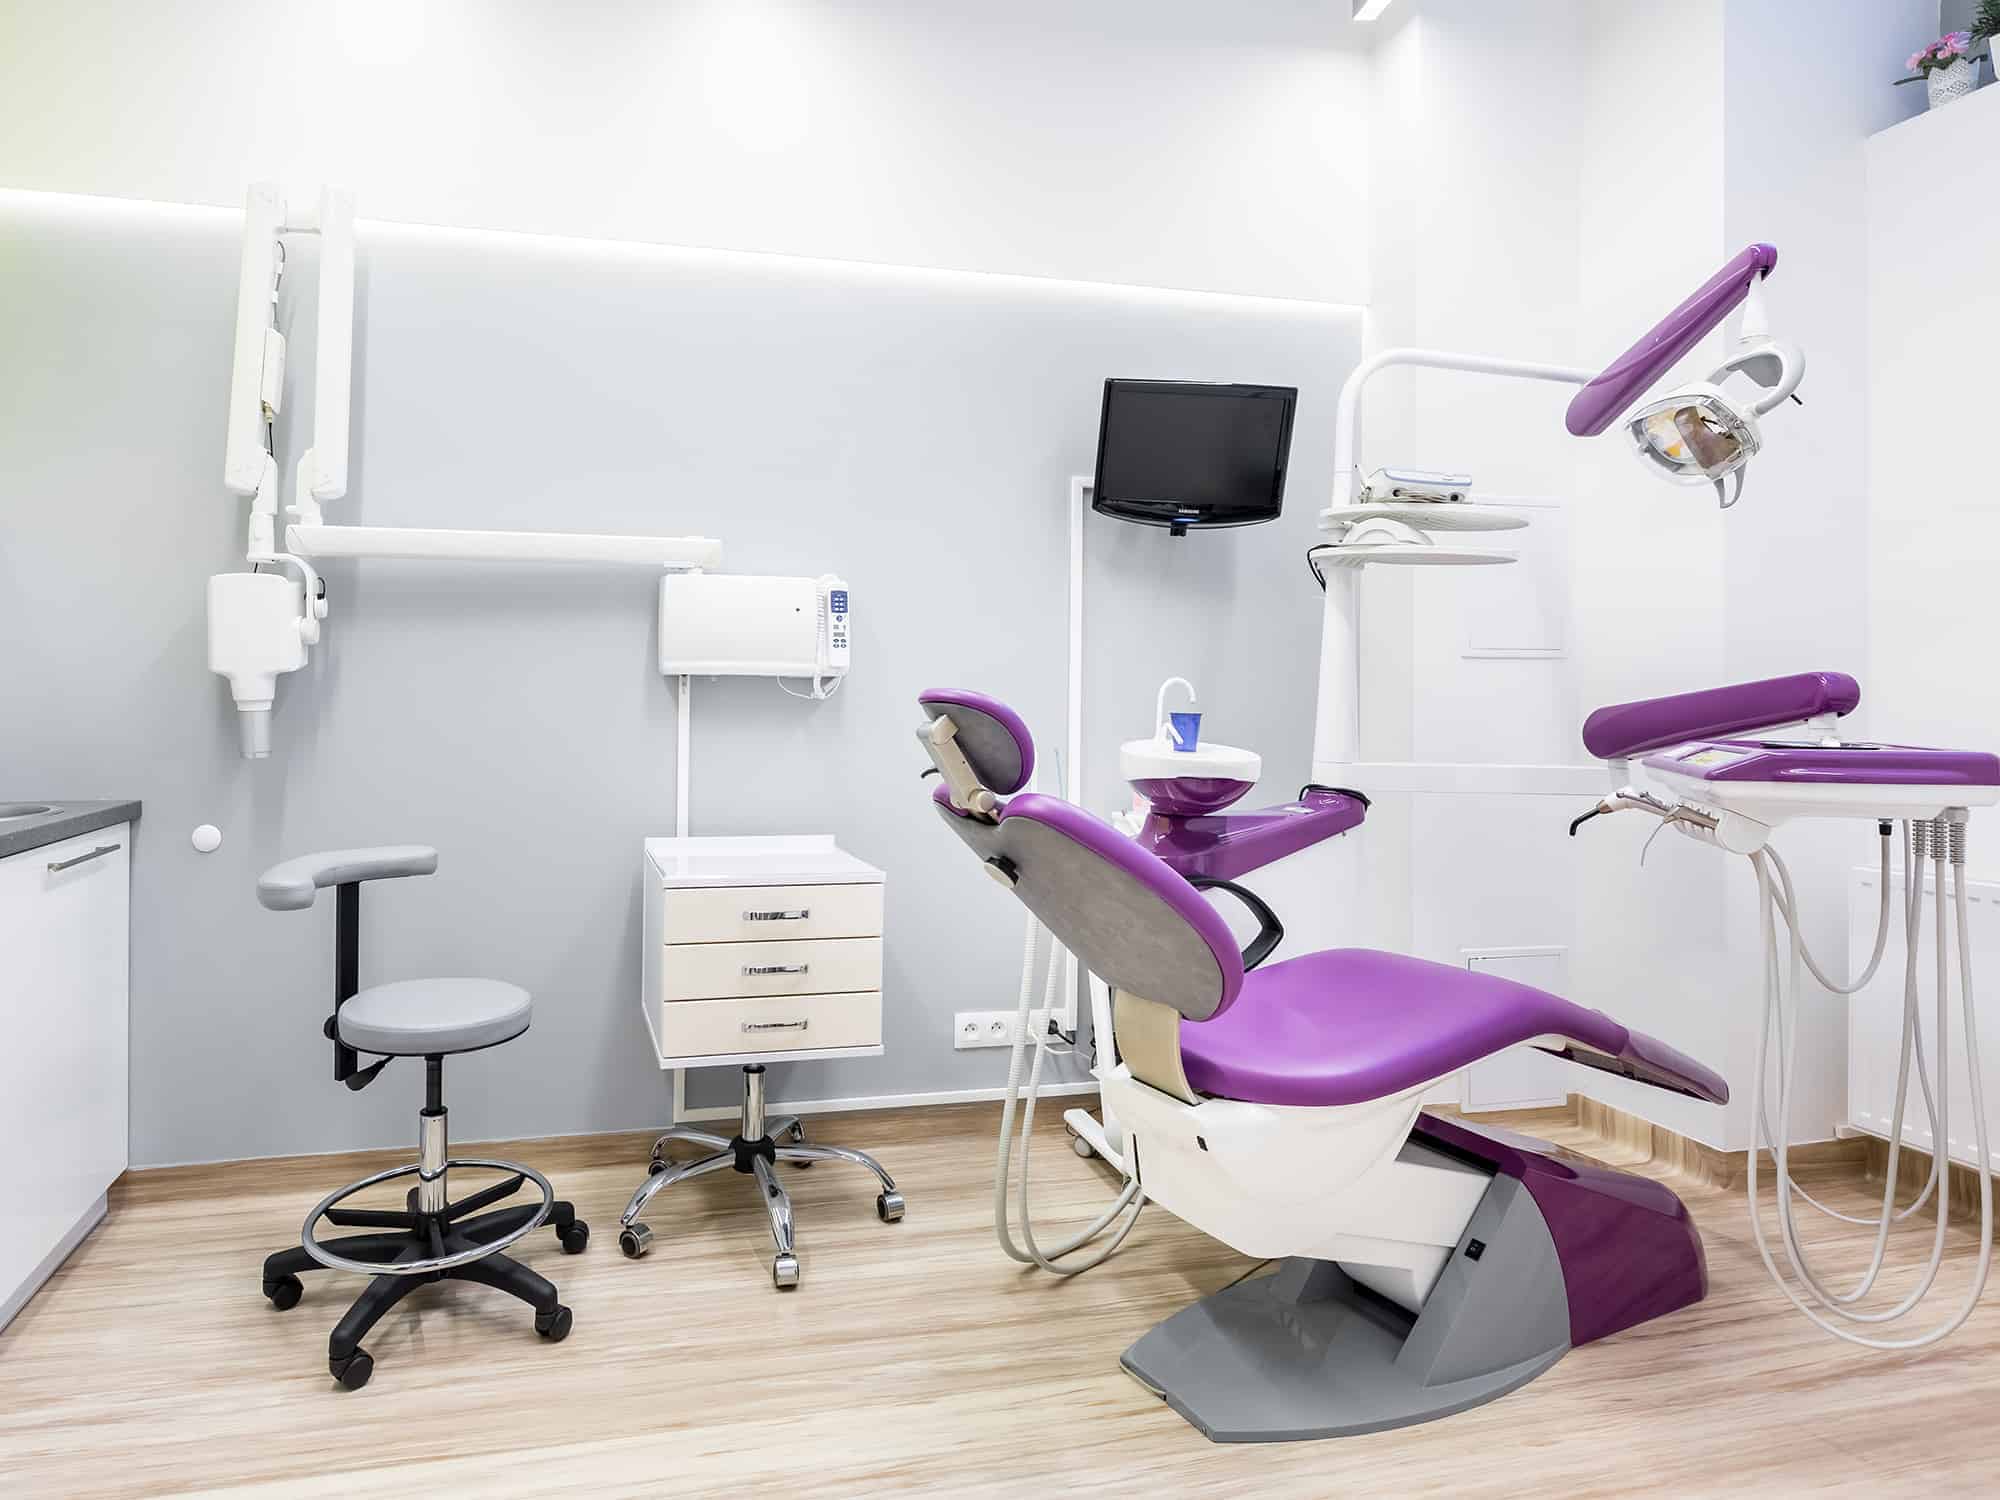 Transform Your Dental Office Into a More Positive Patient Experience